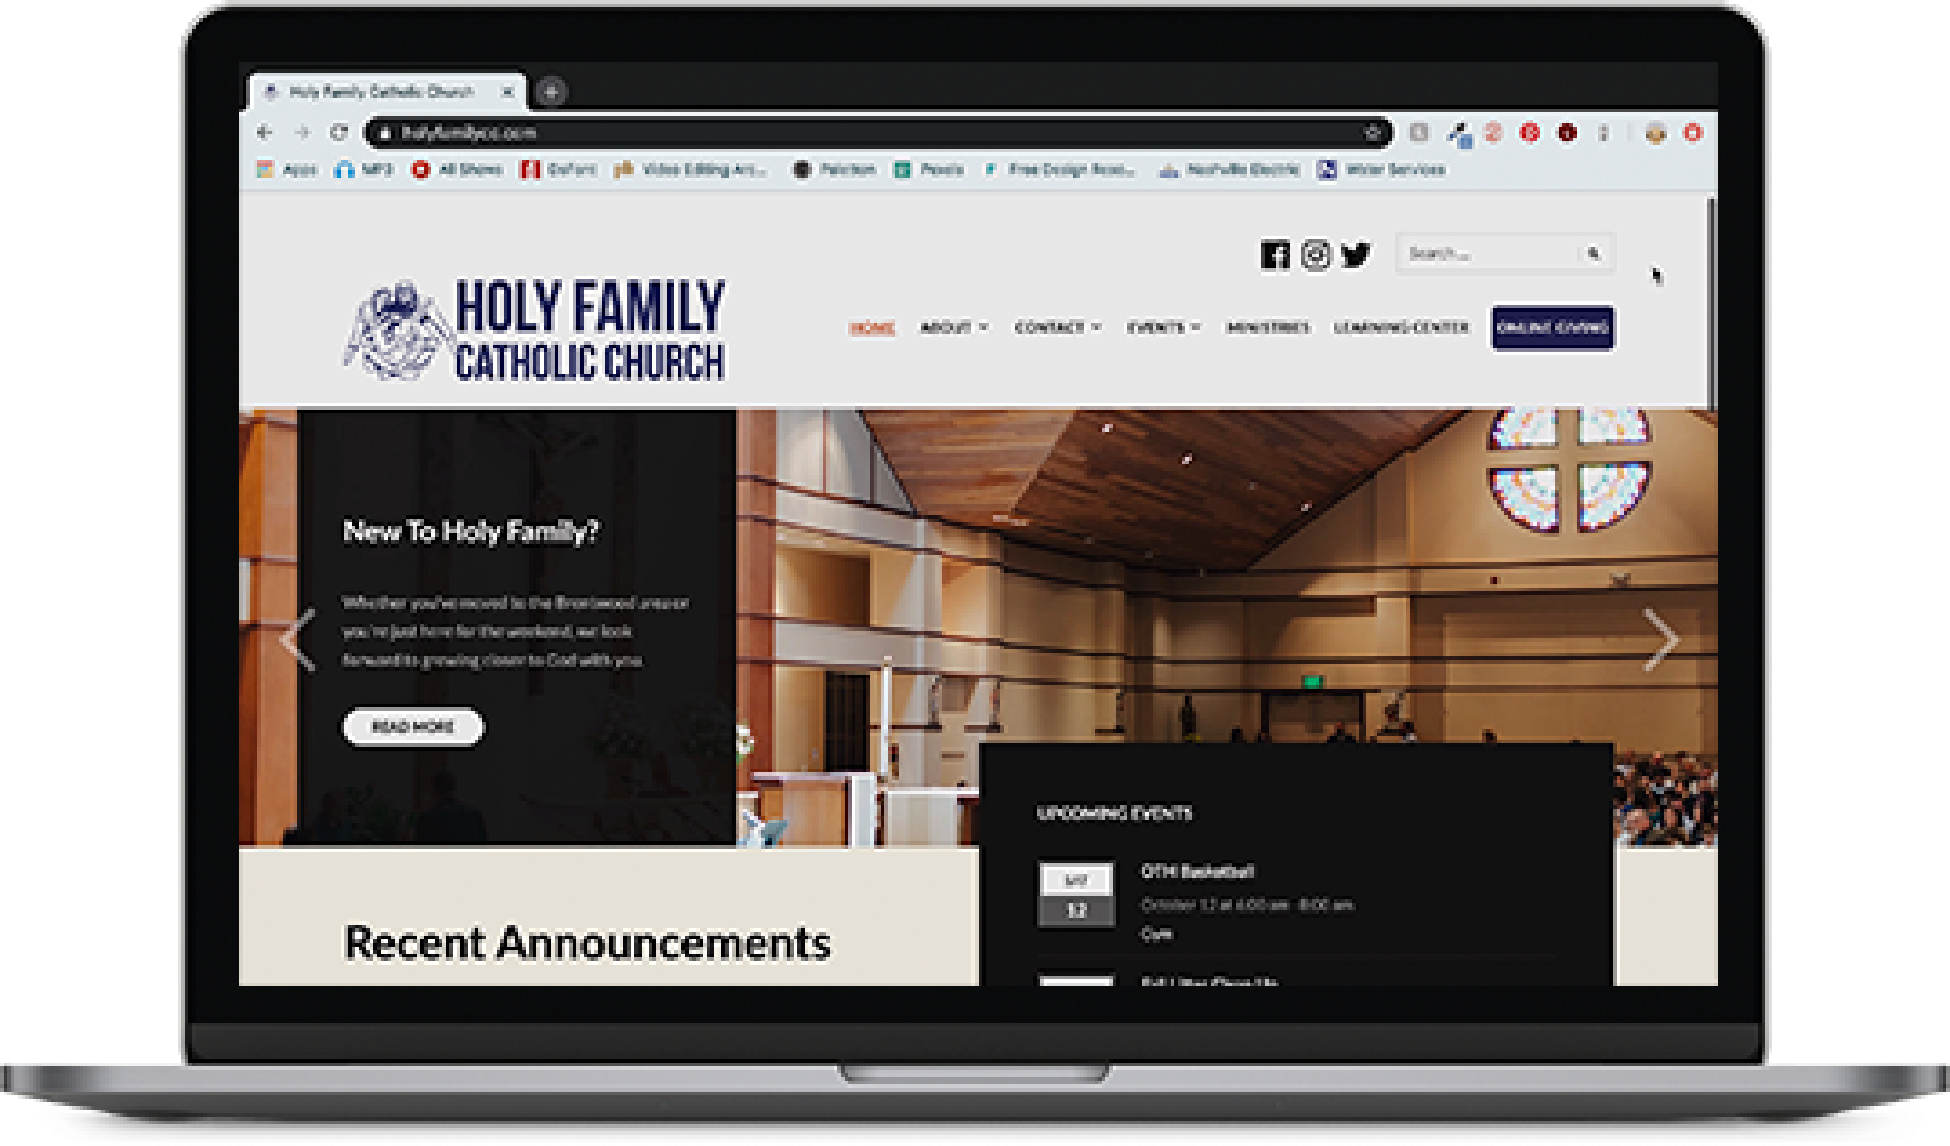 The redesigned Holy Family homepage